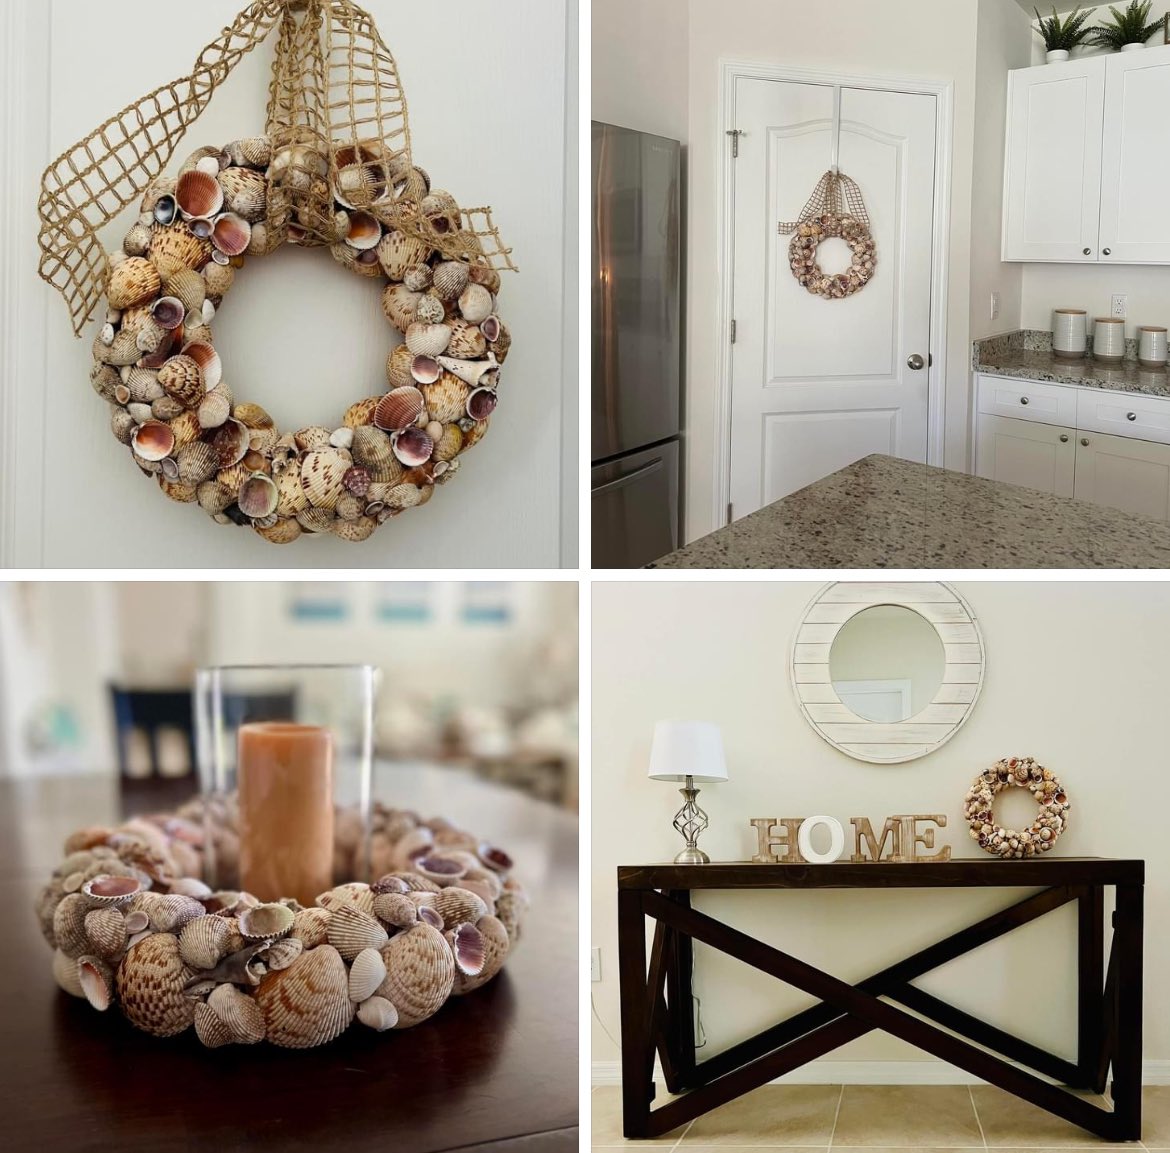 This beautiful coastal seashell wreath is made with shells collected along the Gulf Coast of Clearwater, FL.  It can be used throughout the year to give your home a great coastal vibe.  #coastal #shells #homedecor 

justwreathsllc.etsy.com/listing/168851…